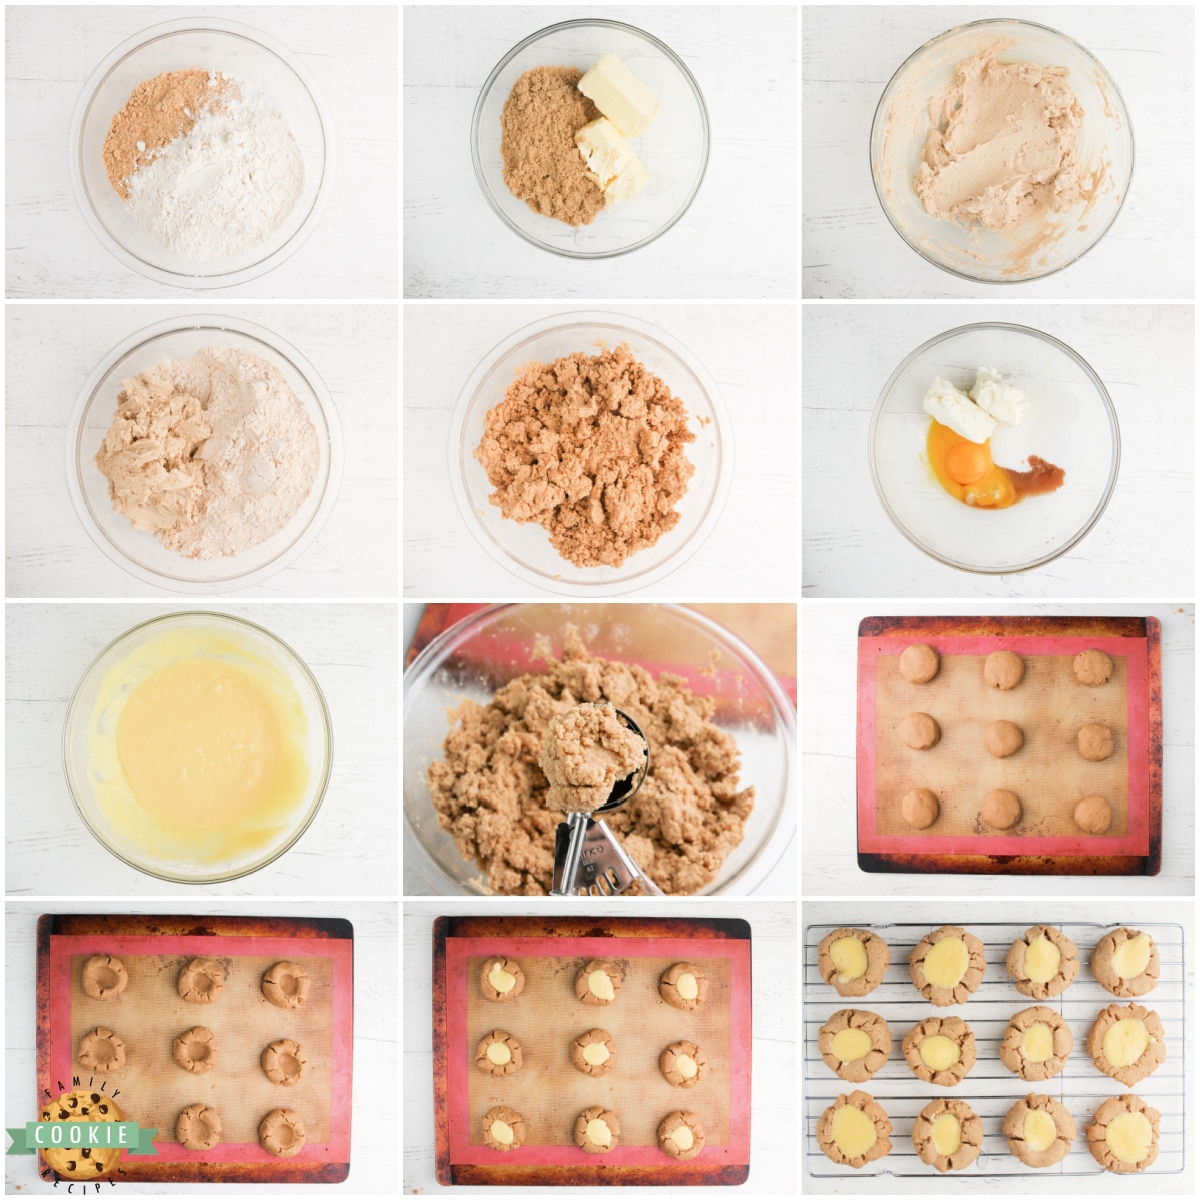 Step by step instructions on how to make Cheesecake Cookies